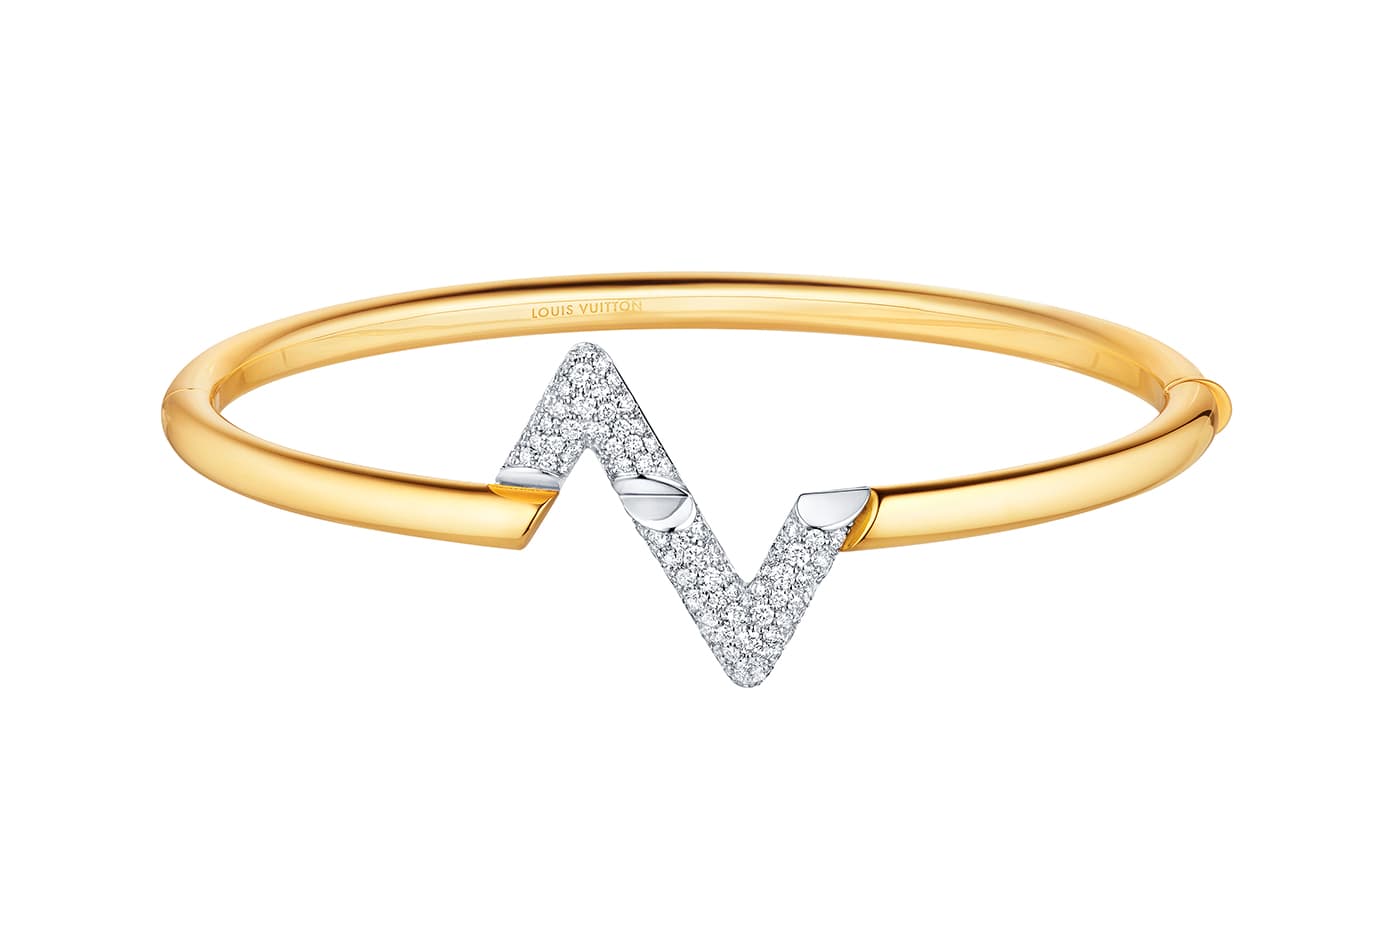 LV Volt Upside Down Ring, White Gold And Diamonds - Jewelry